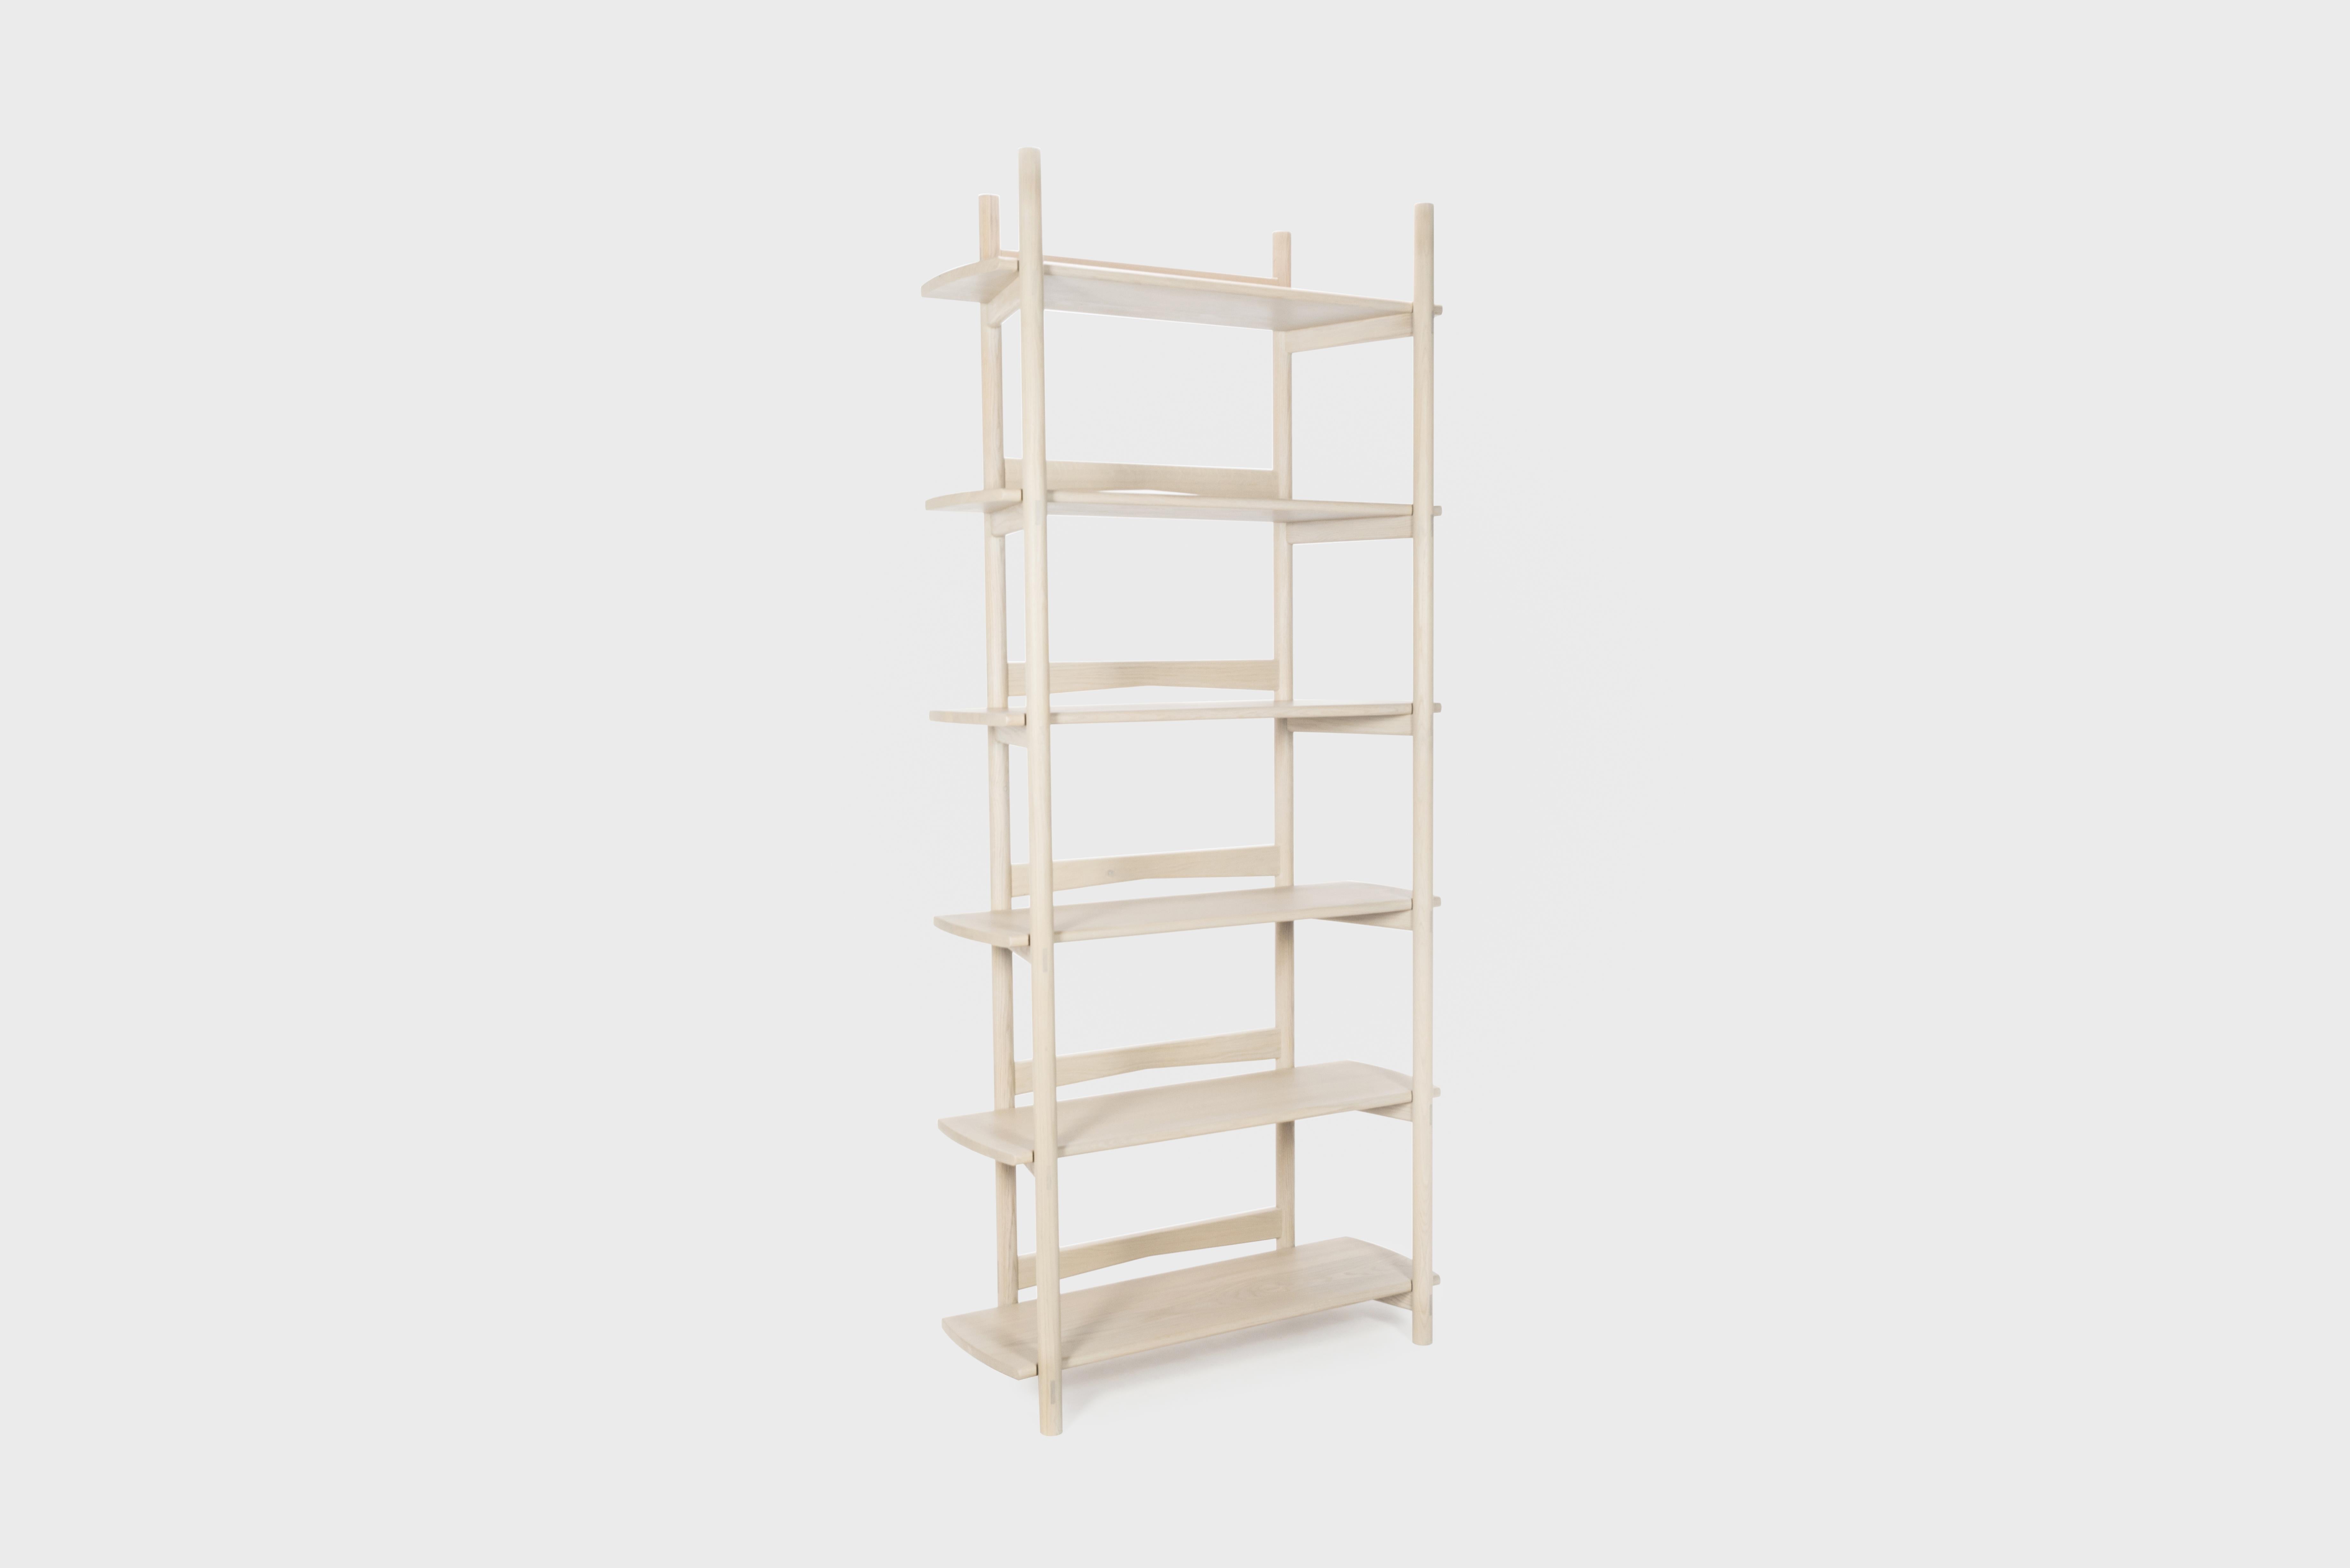 Sun at Six is a contemporary furniture design studio that works with traditional Chinese joinery masters to handcraft our pieces using traditional joinery. The Mora bookcase comes fully assembled, built from solid white oak, finished in our house